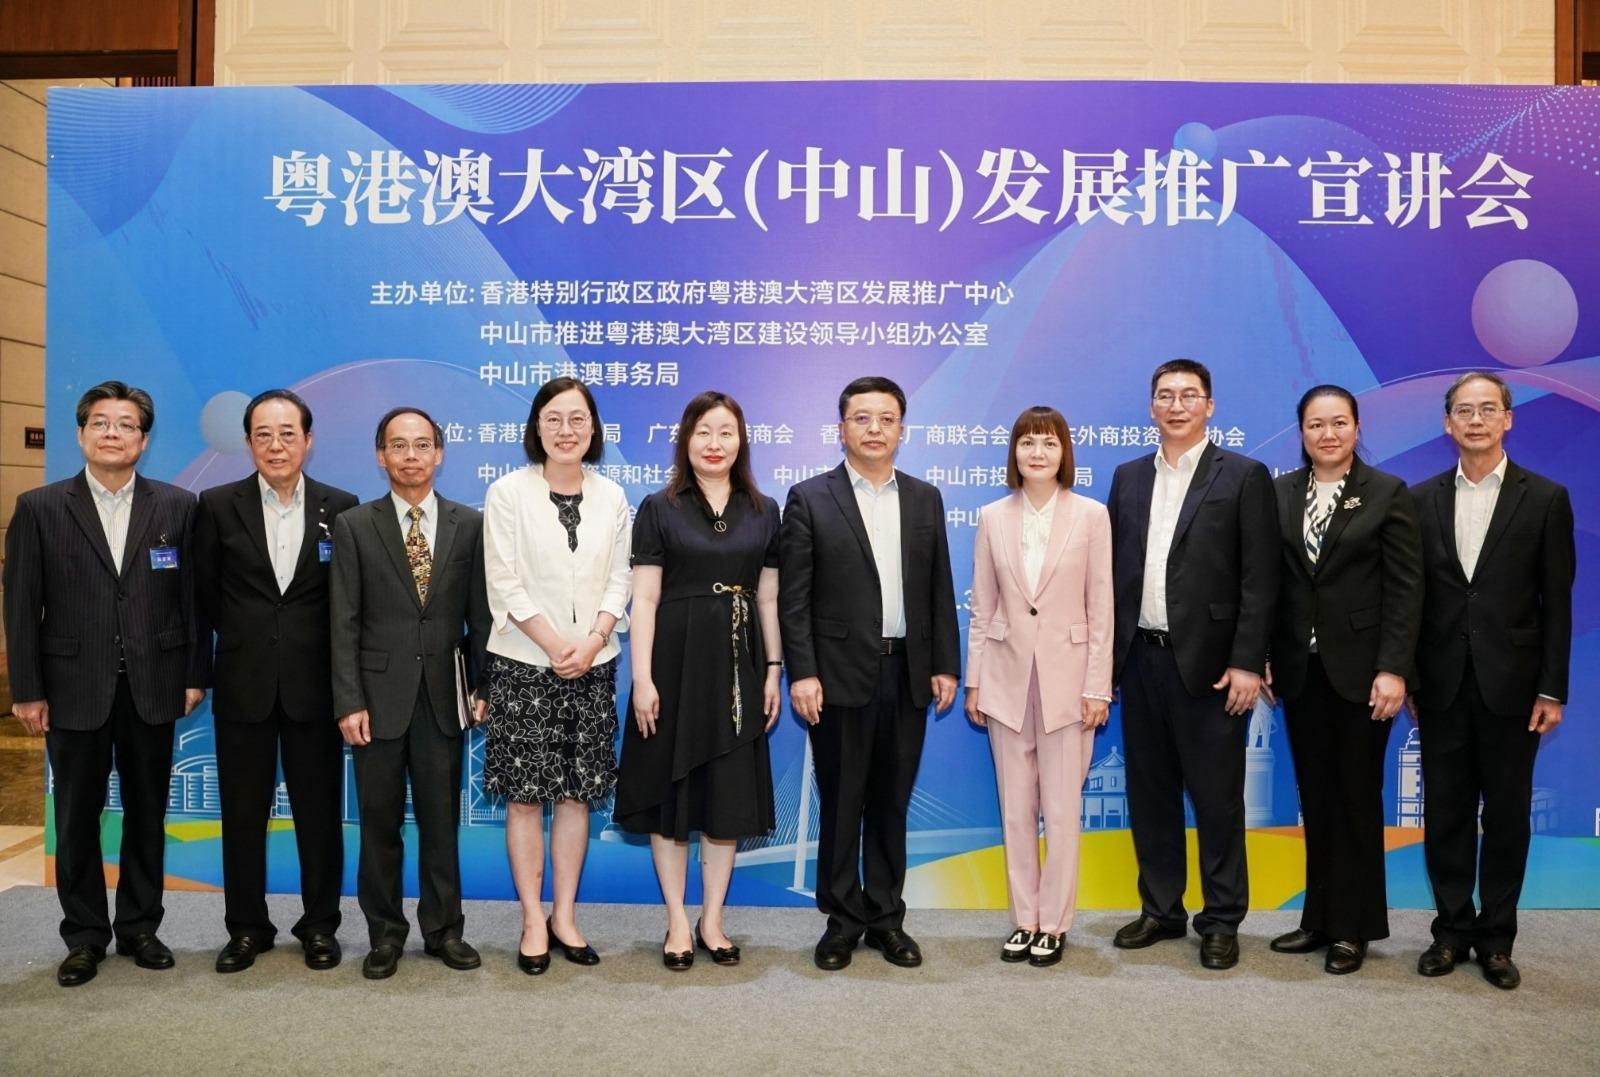 The Commissioner for the Development of the Guangdong-Hong Kong-Macao Greater Bay Area, Ms Maisie Chan (fourth right), poses for a photo with the member of the Standing Committee of the Communist Party of China Zhongshan Municipal Committee and Vice Mayor of Zhongshan, Mr Ye Hongguang (fifth right), before attending the Symposium for Promoting the Development of the Guangdong-Hong Kong-Macao Greater Bay Area in Zhongshan today (June 3).  